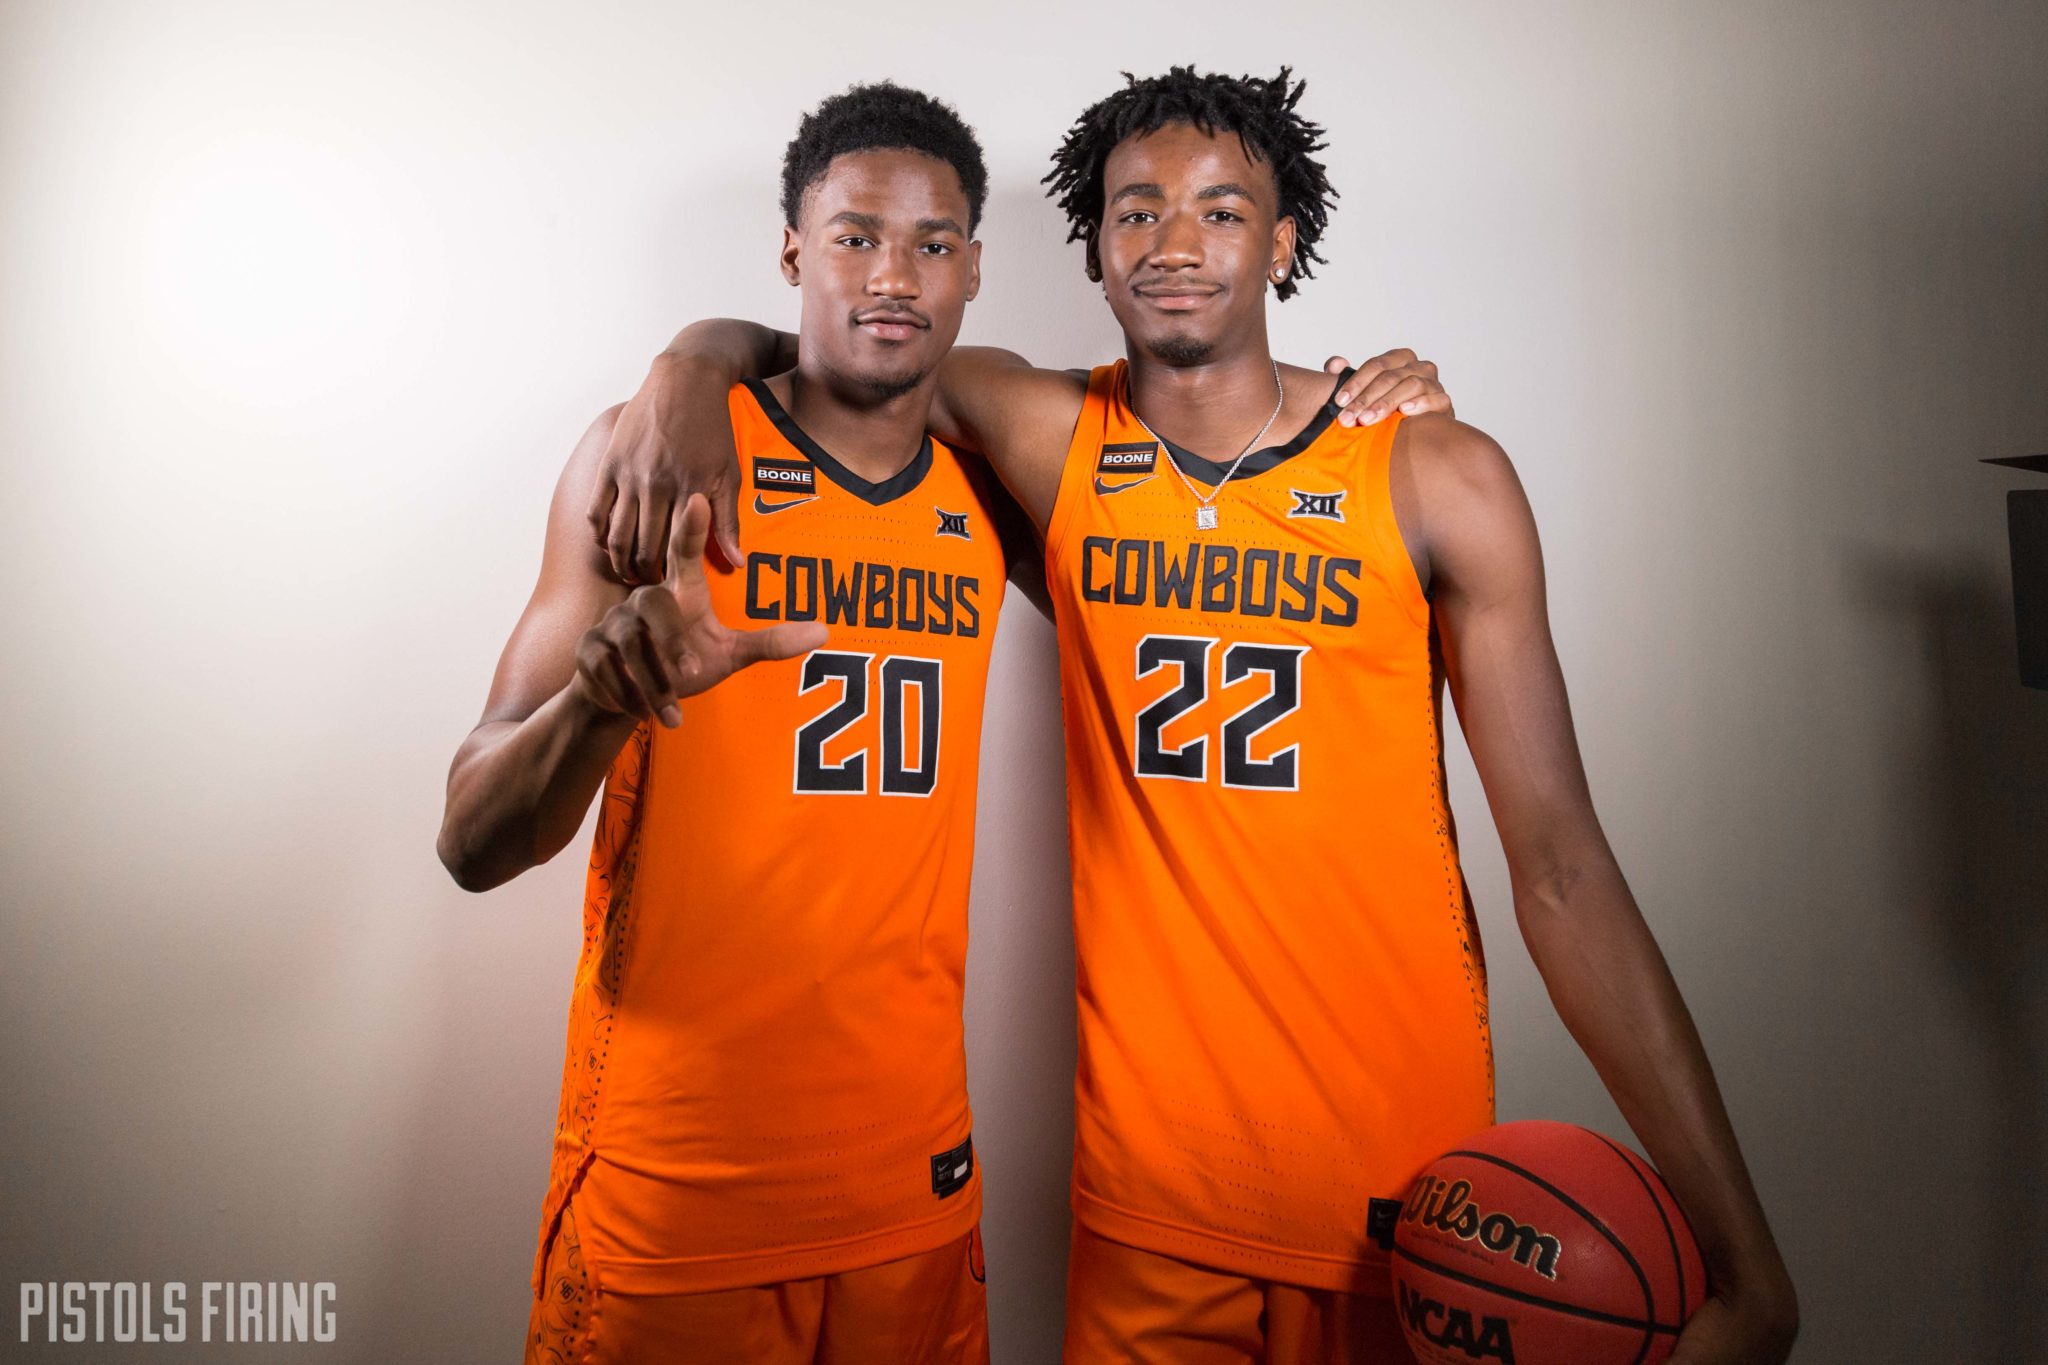 Three (NonCade) Players Who Are Vital to OSU Basketball Success Next